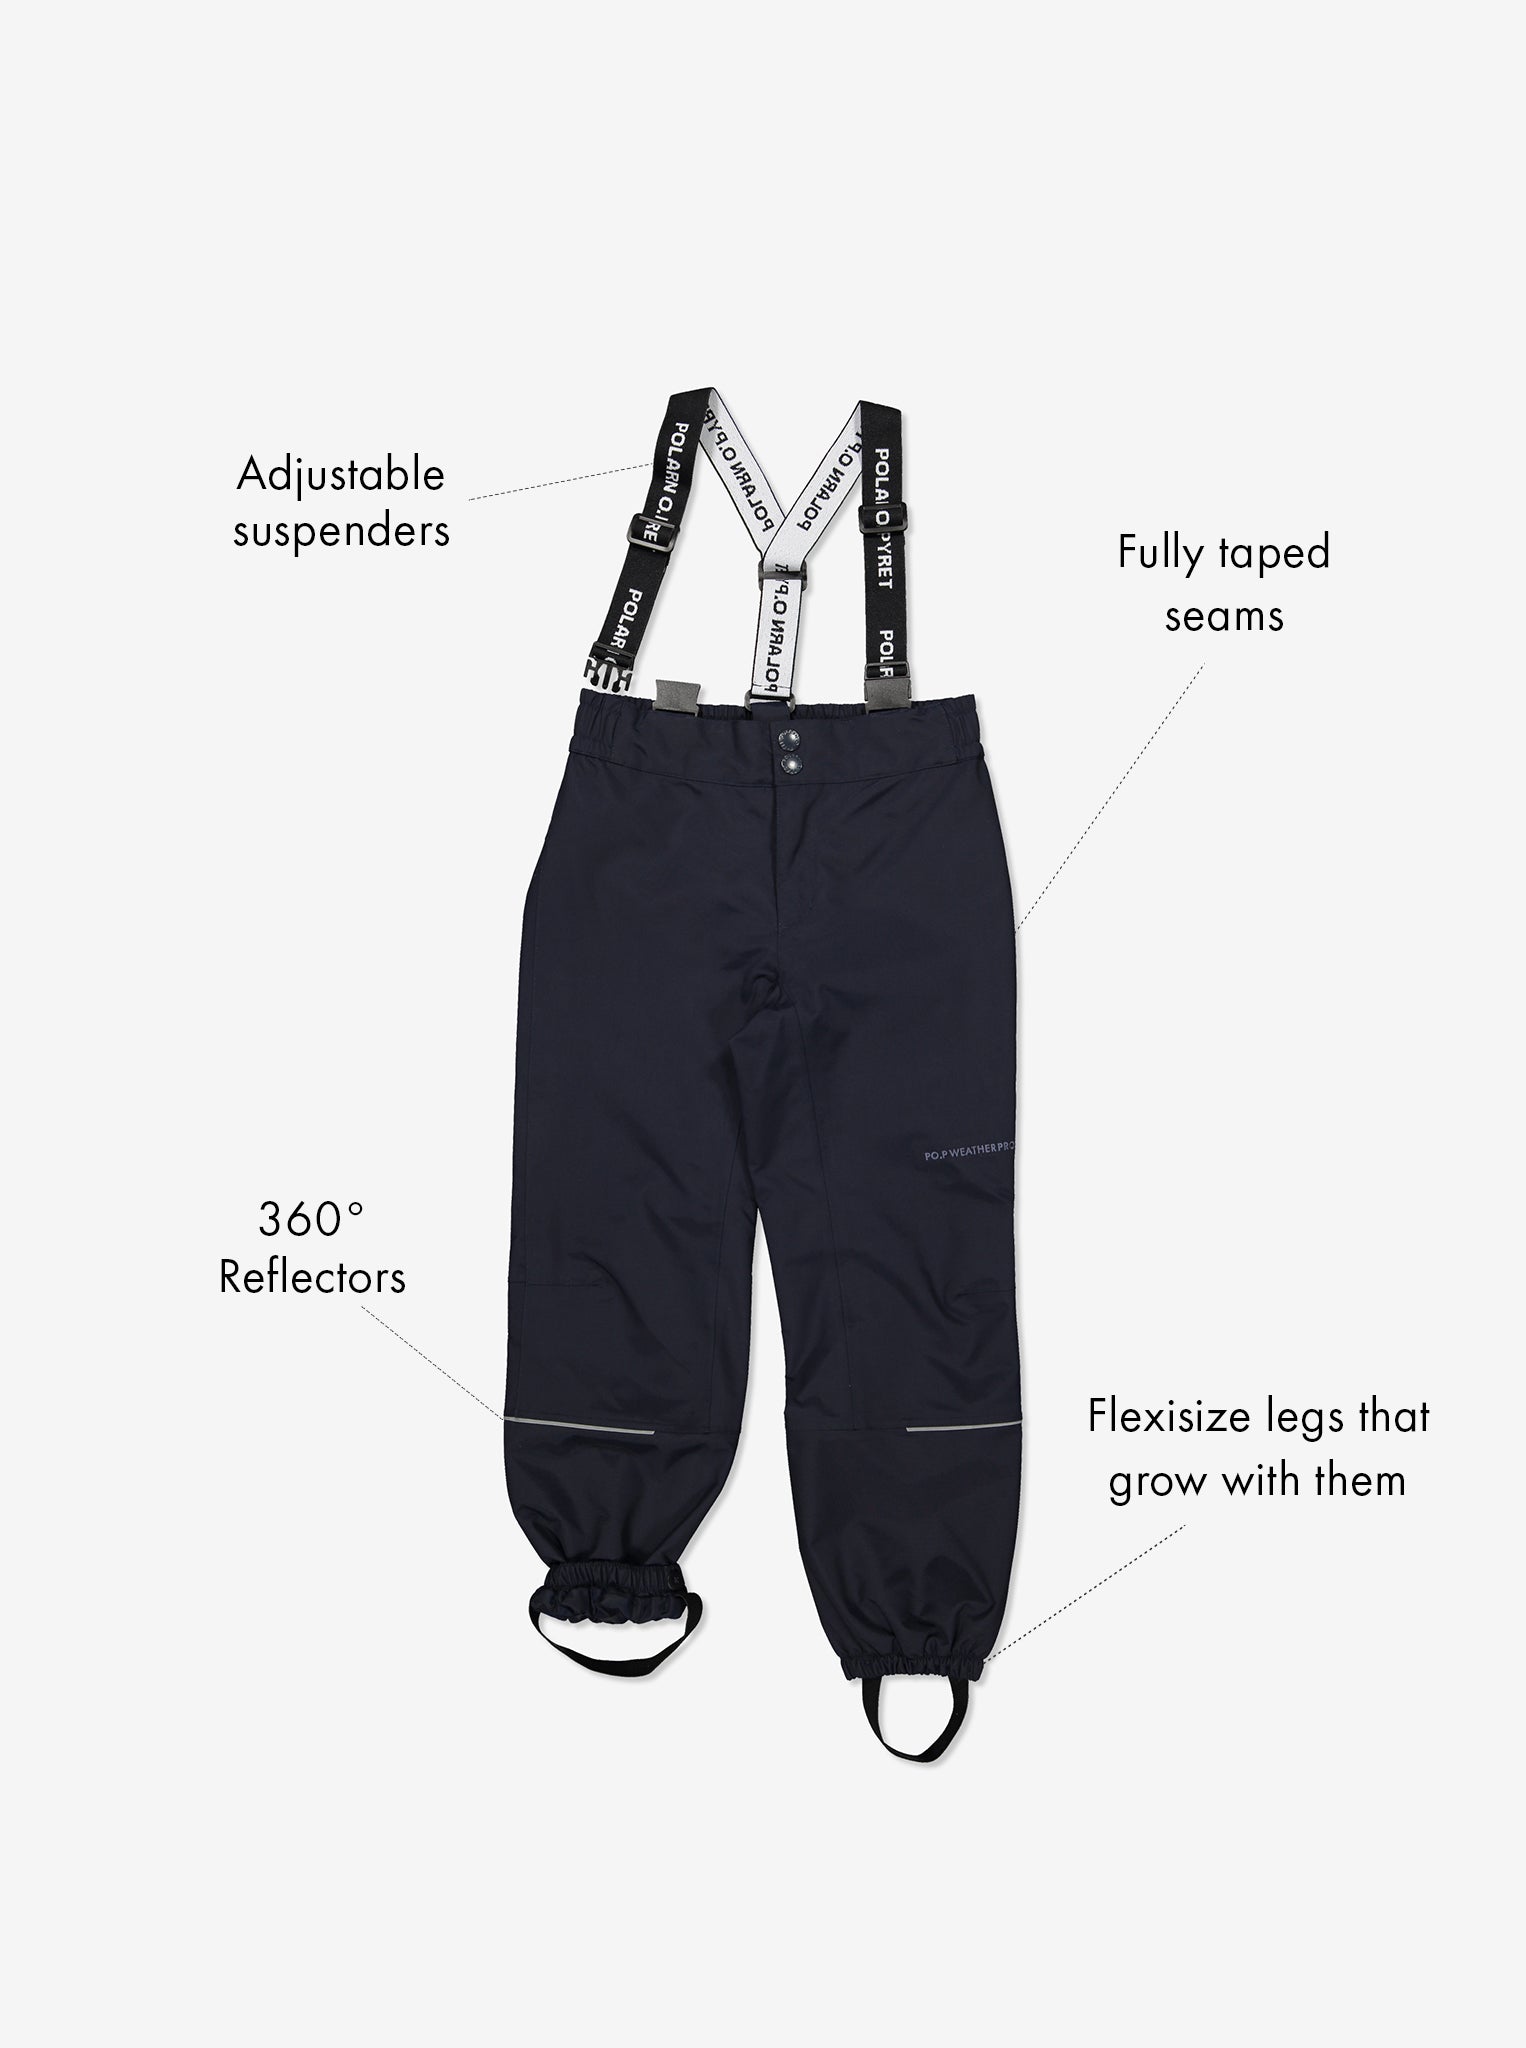 Kids extendable Navy Waterproof Shell Trousers, warm ethical high quality 